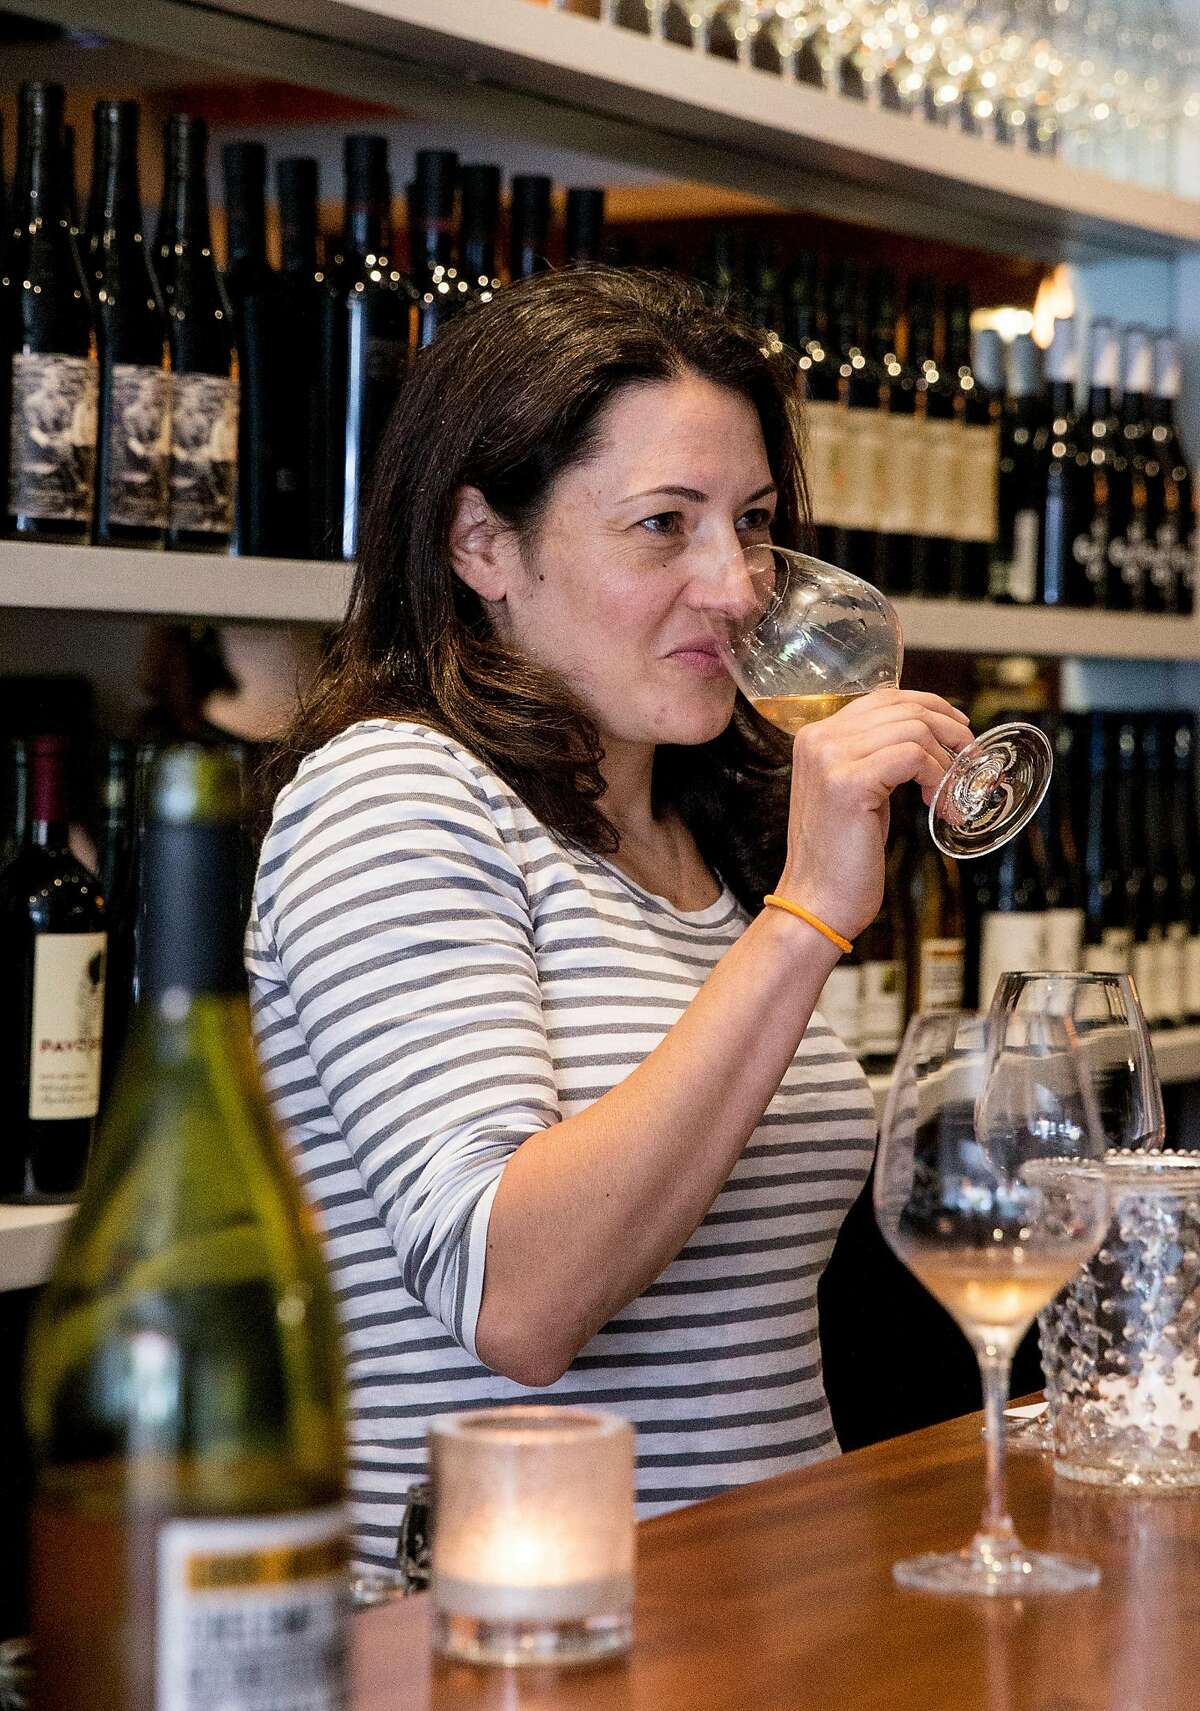 Wine director Sarah Trubnick tastes potential new wines with a seller at Parigo in the Marina district of San Francisco, Calif. Thursday, July 19, 2018.